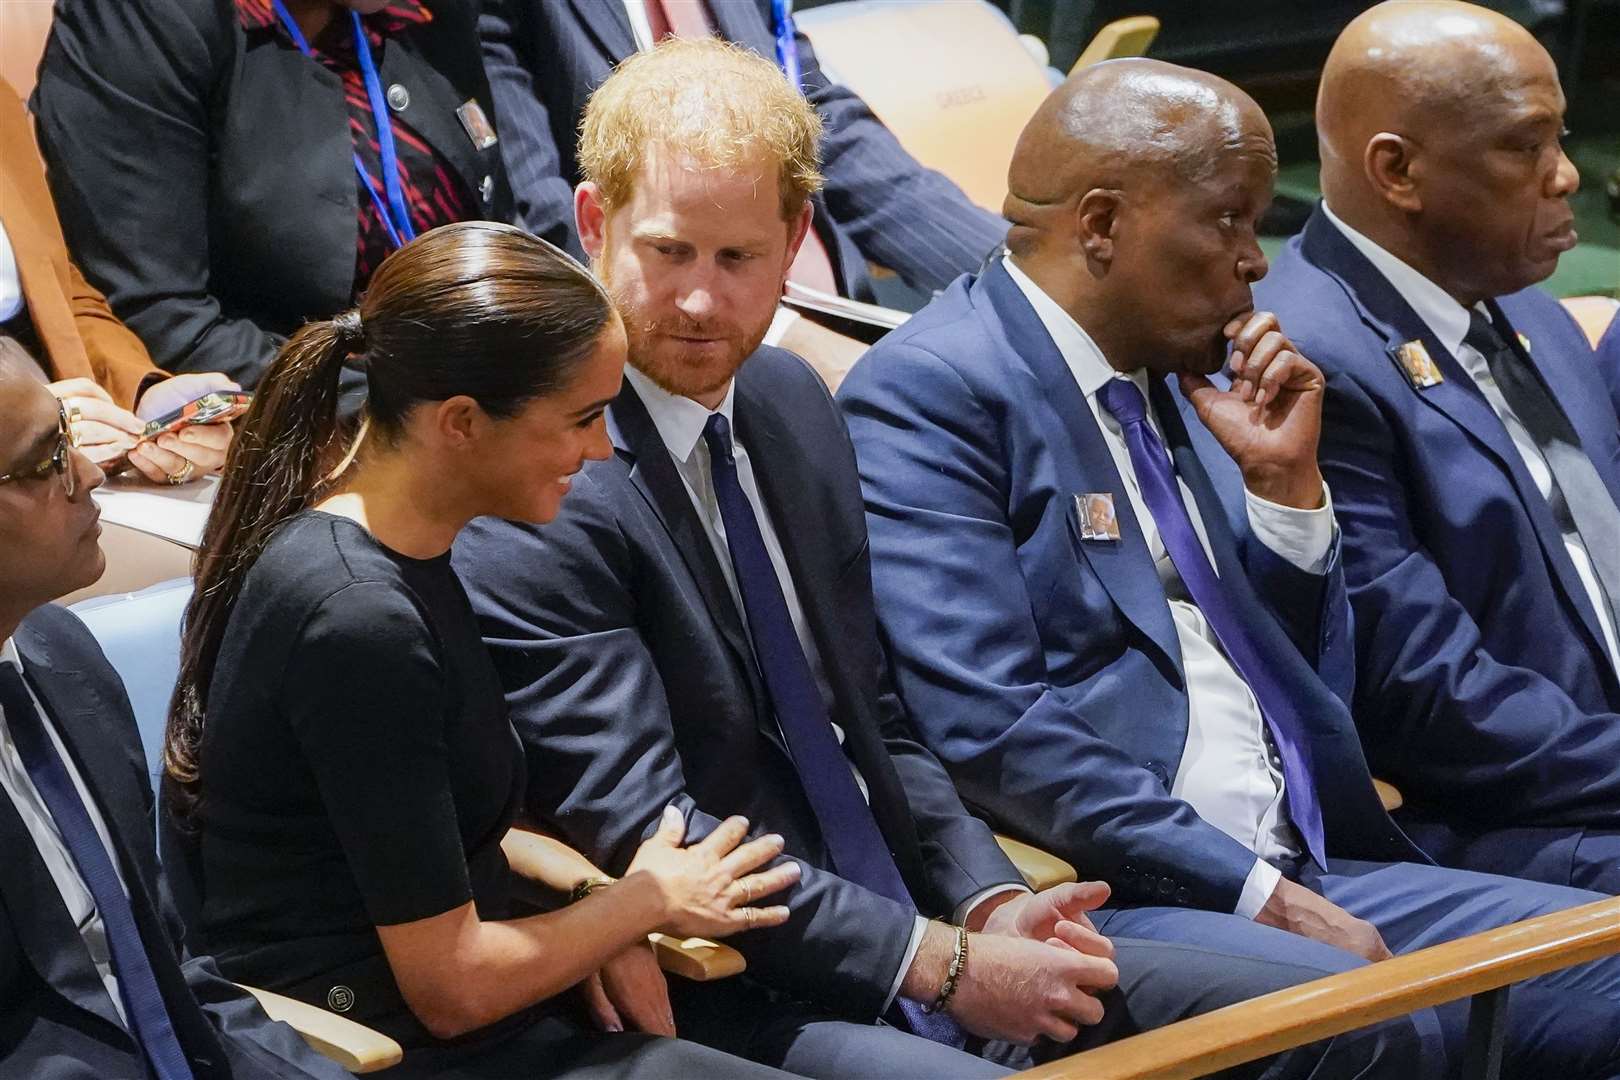 The duke was joined by his actress wife Meghan (John Minchillo/AP)